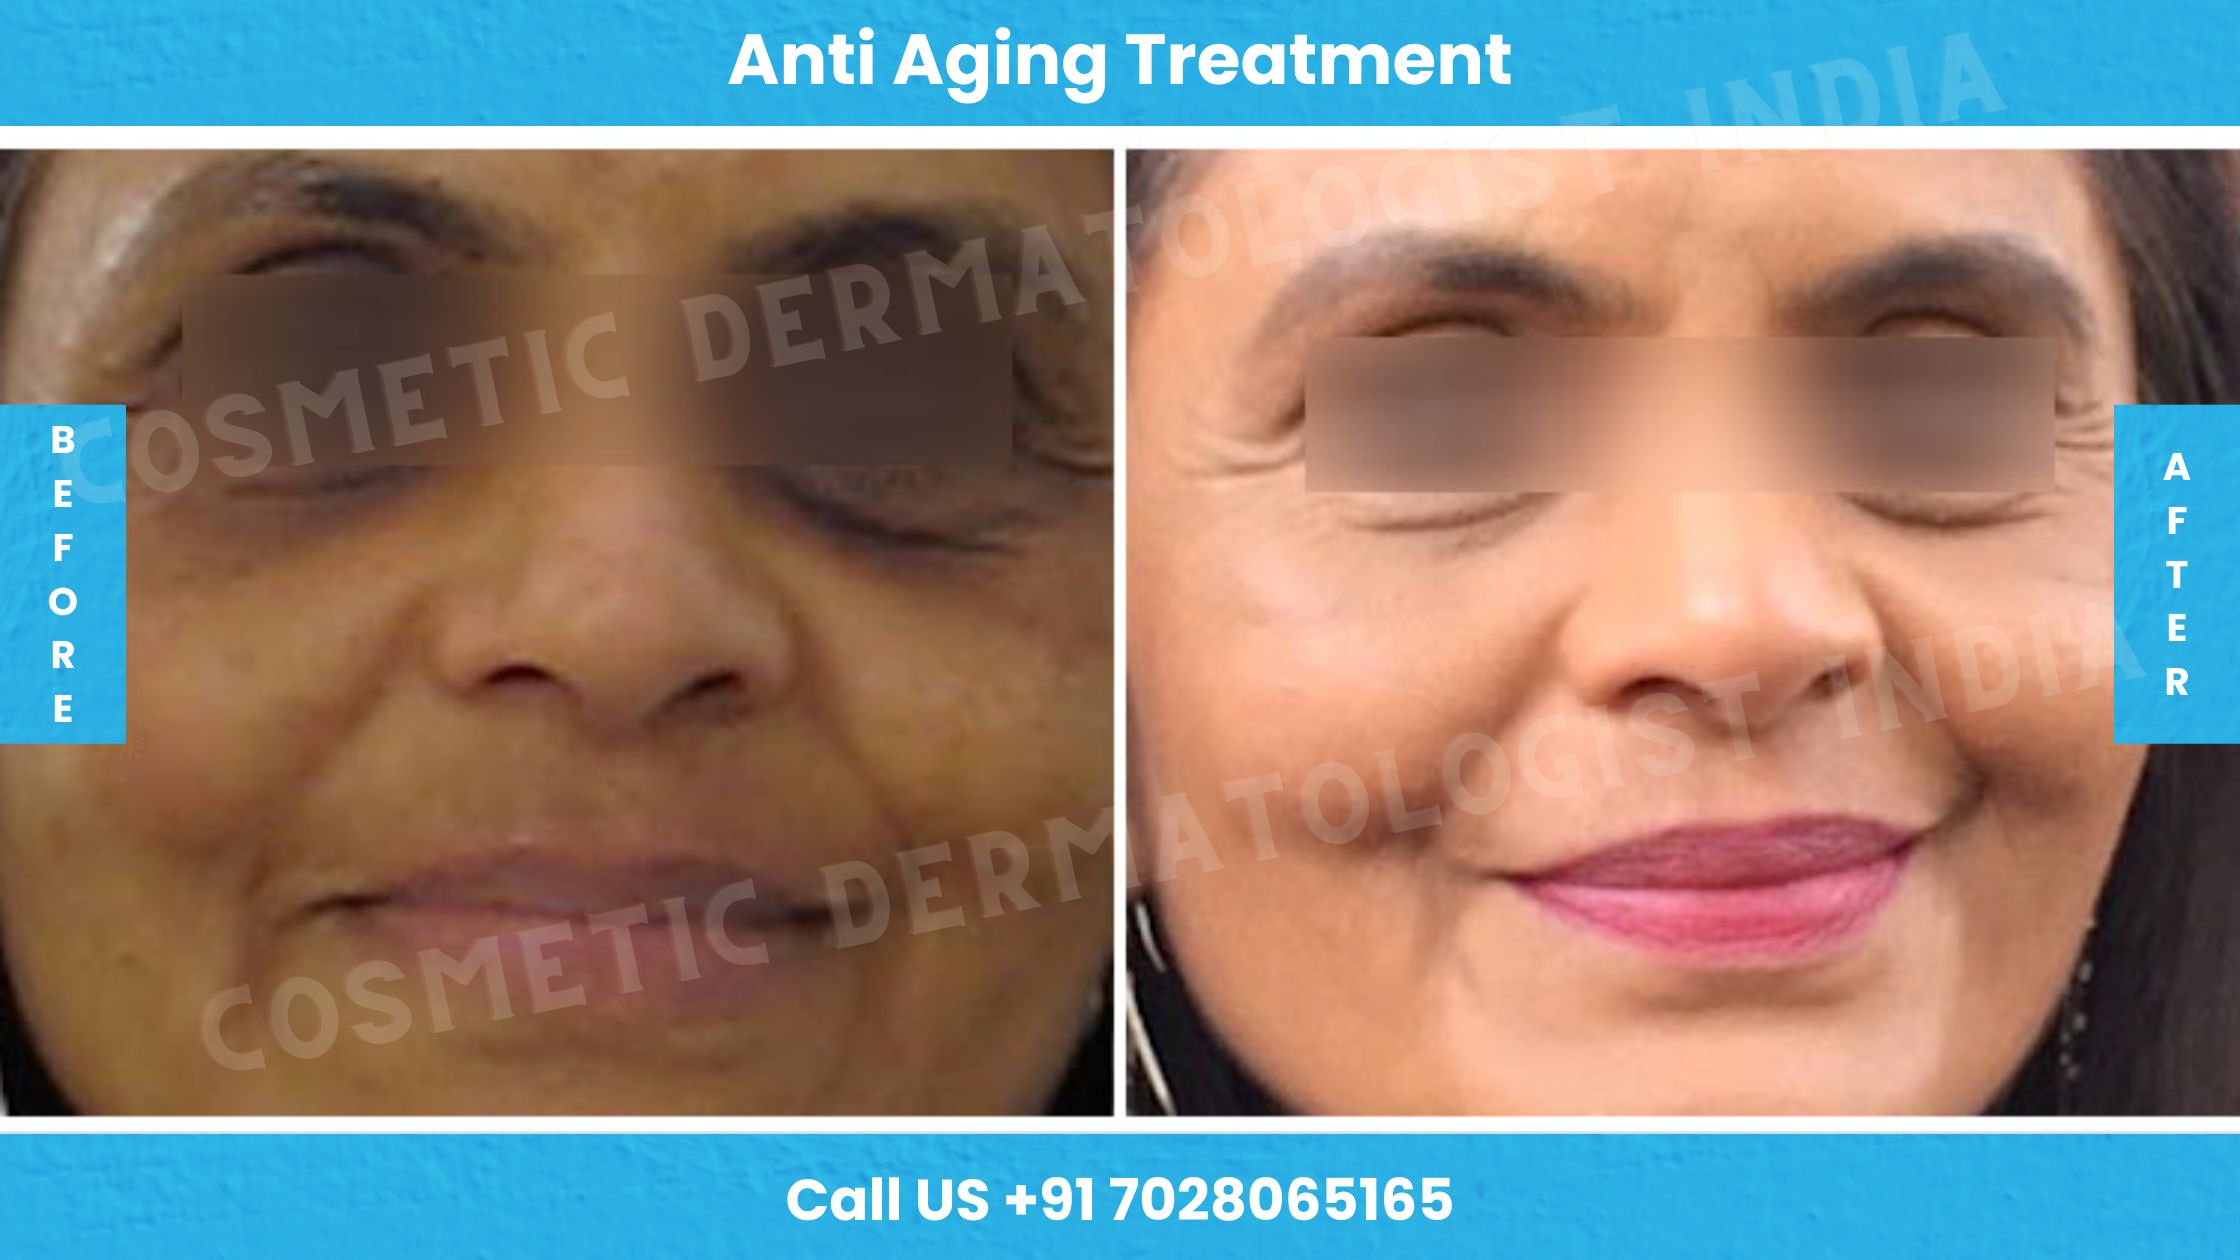 Before and After Images of Anti Aging Treatment